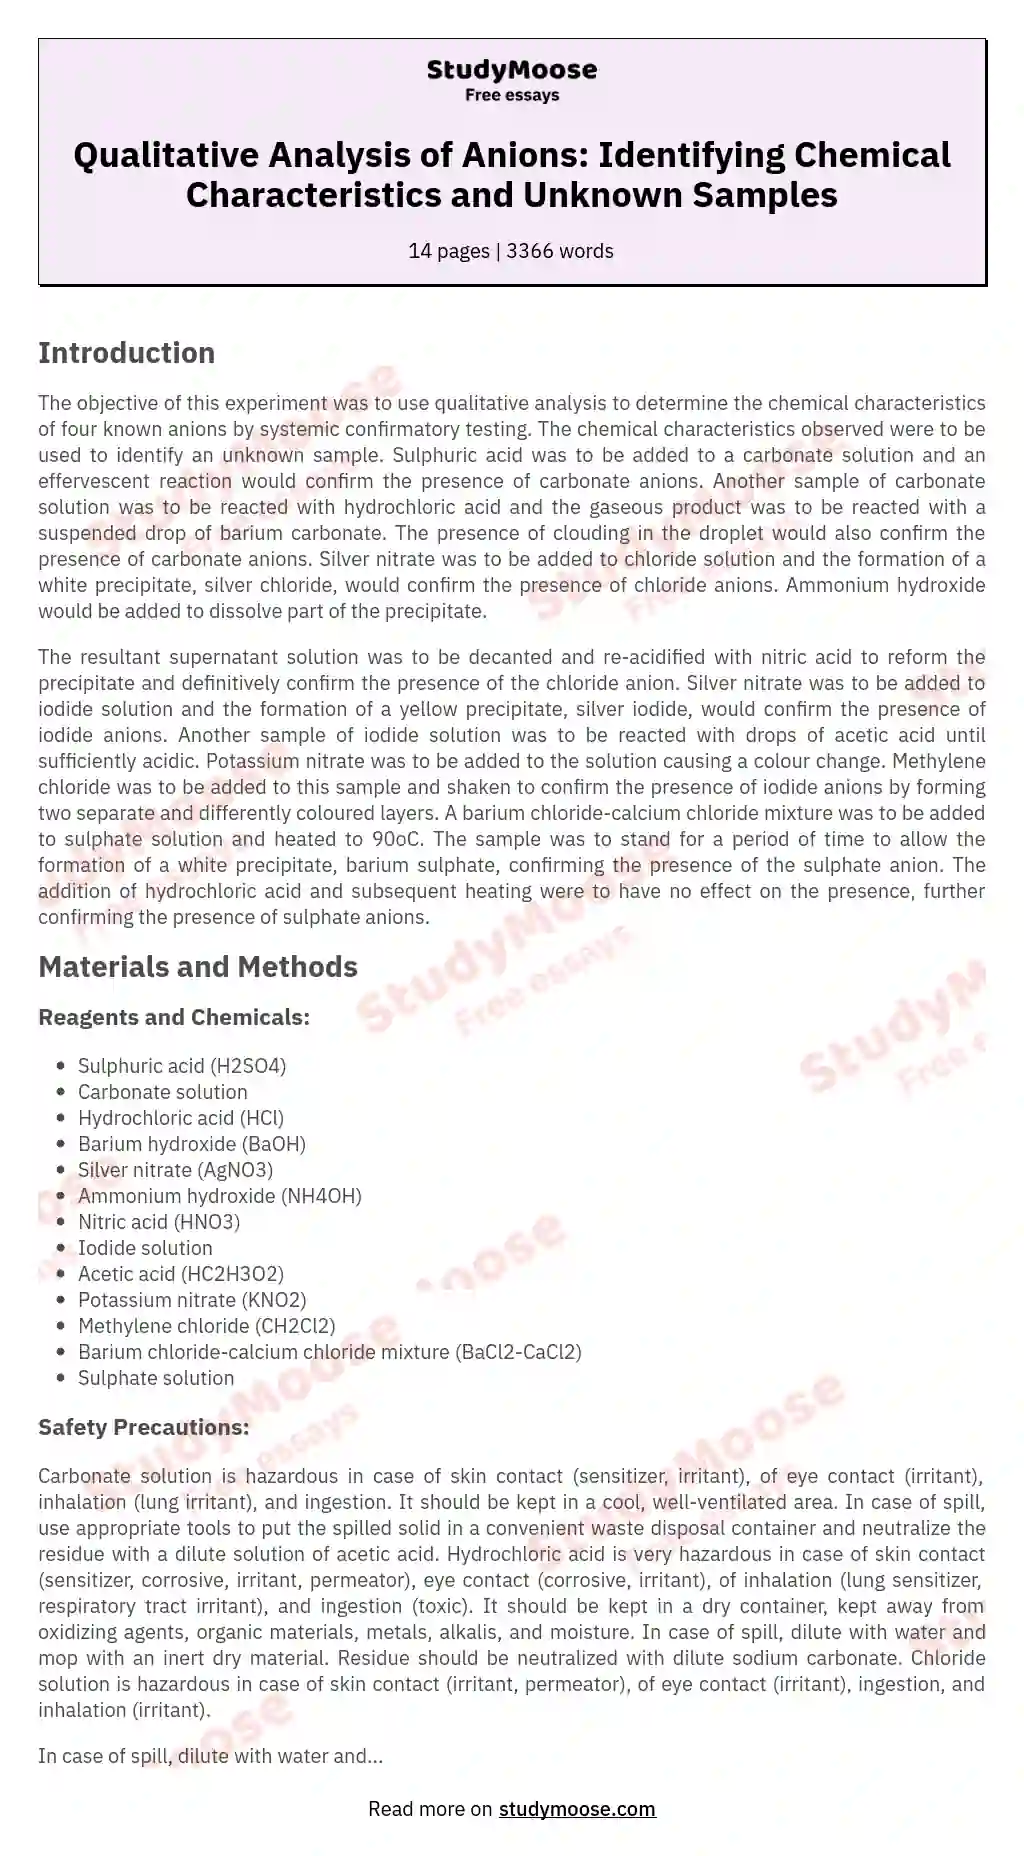 Qualitative Analysis of Anions: Identifying Chemical Characteristics and Unknown Samples essay